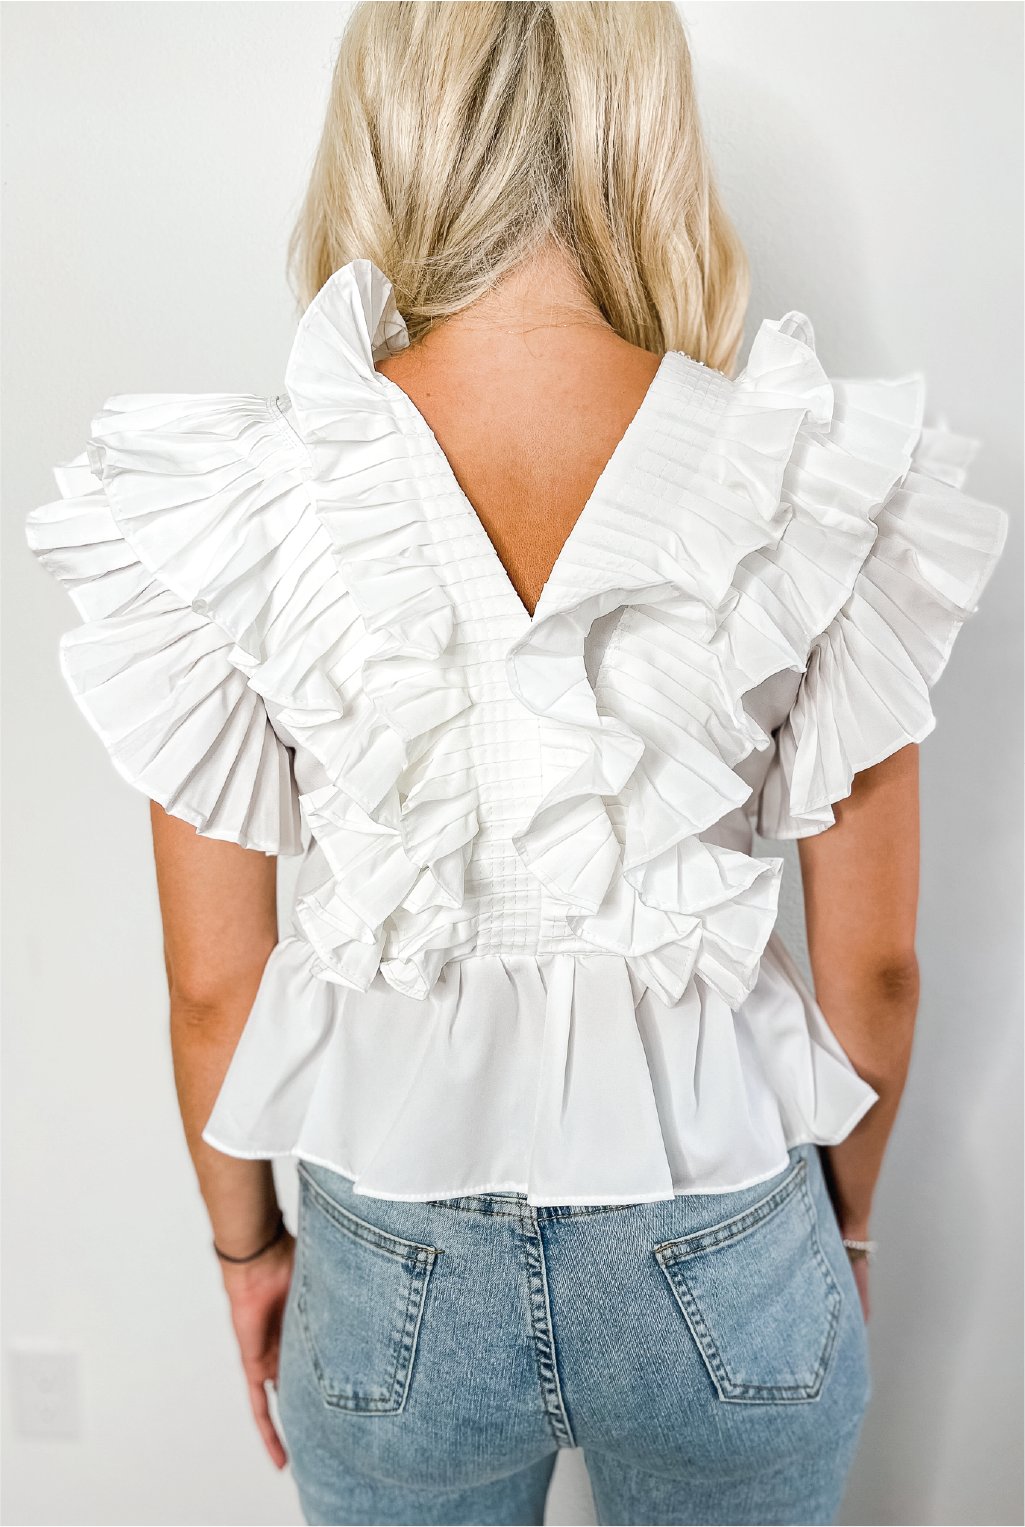 Bedazzled Beatrice Blouse - White